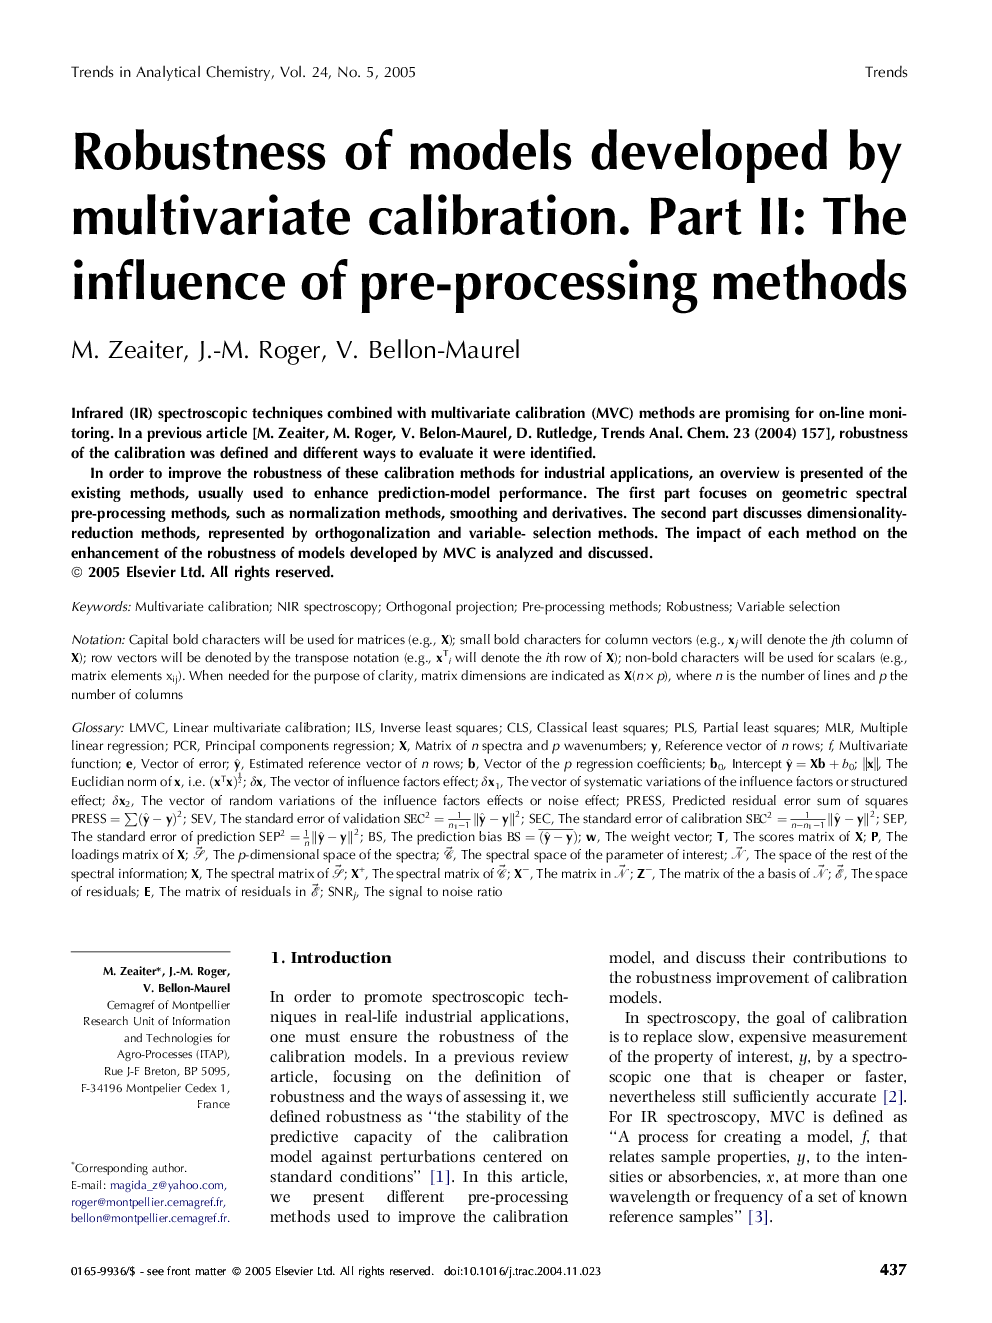 Robustness of models developed by multivariate calibration. Part II: The influence of pre-processing methods